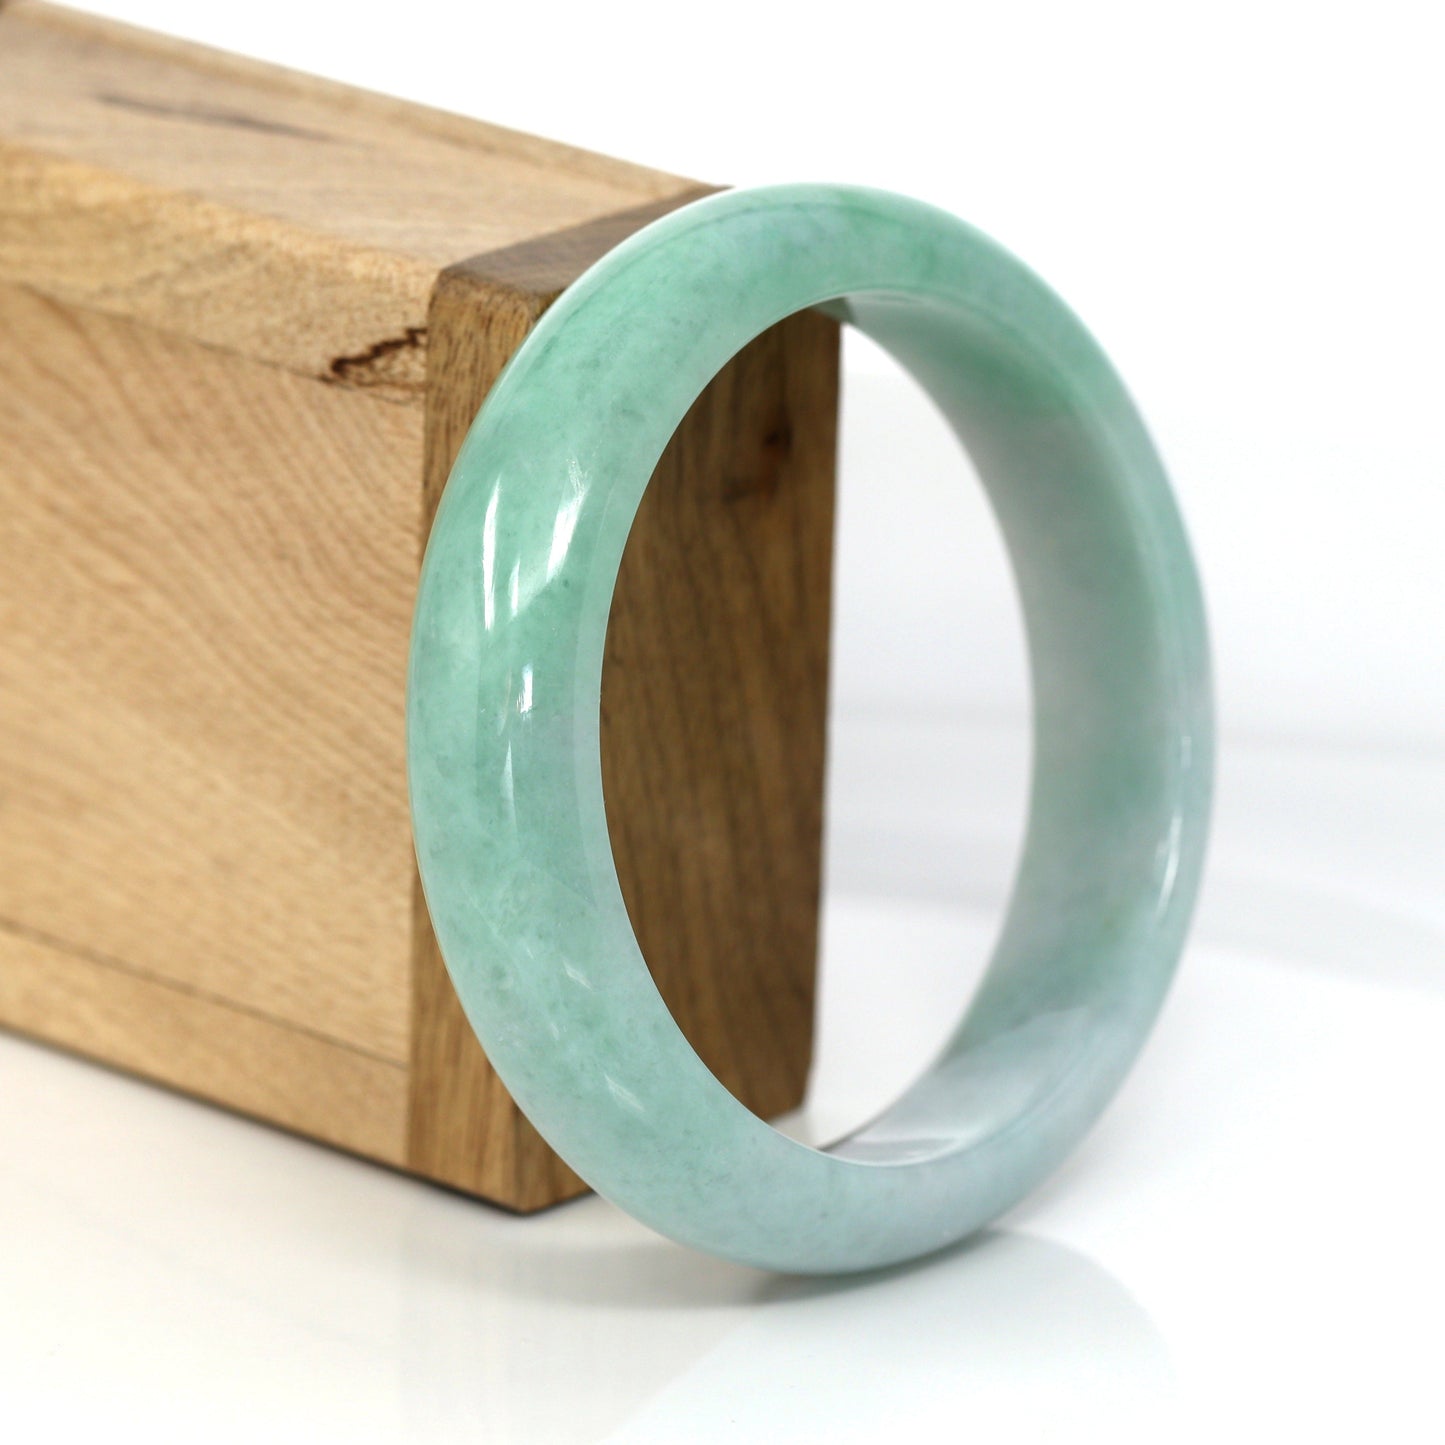 Load image into Gallery viewer, High-quality Lavender-Green Natural Burmese Jadeite Jade Bangle (59.68 mm ) #296
